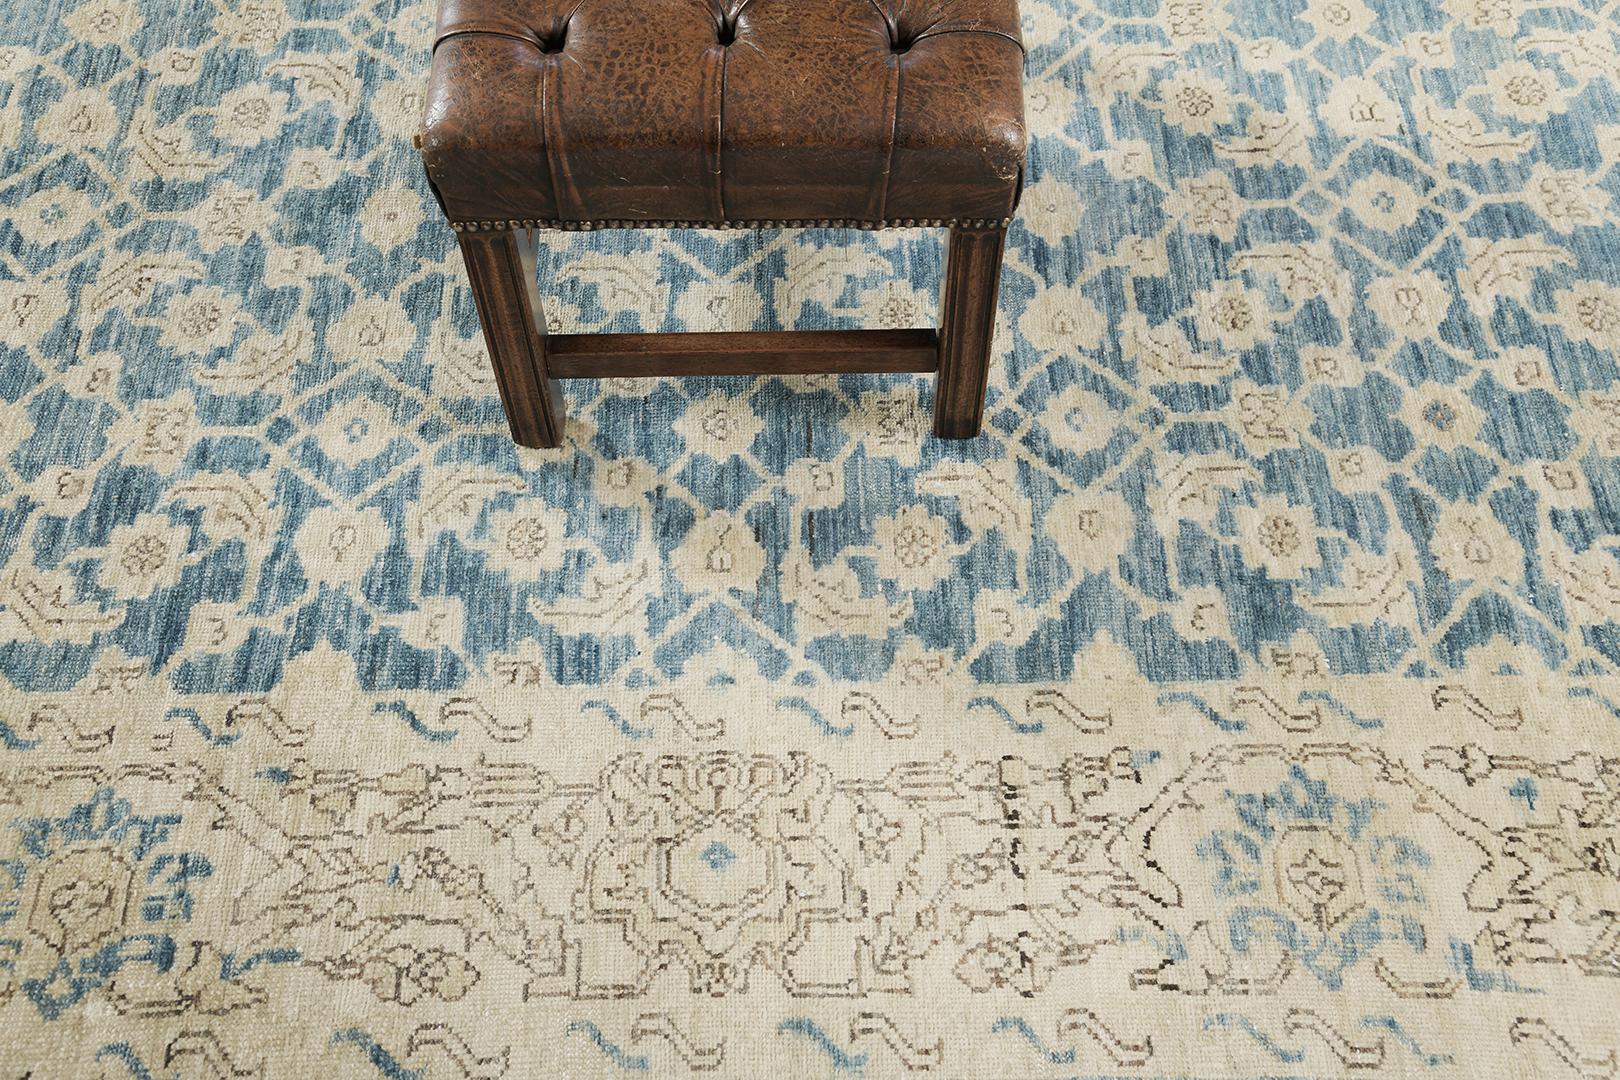 Behold and grab a glance at the charm of the Persian Malayer from our sought-after Traditional Recreation collection. Majestic neutral tones feature the outline details of Persian blooming elements of daisies and carnations in a blue field. Elegant